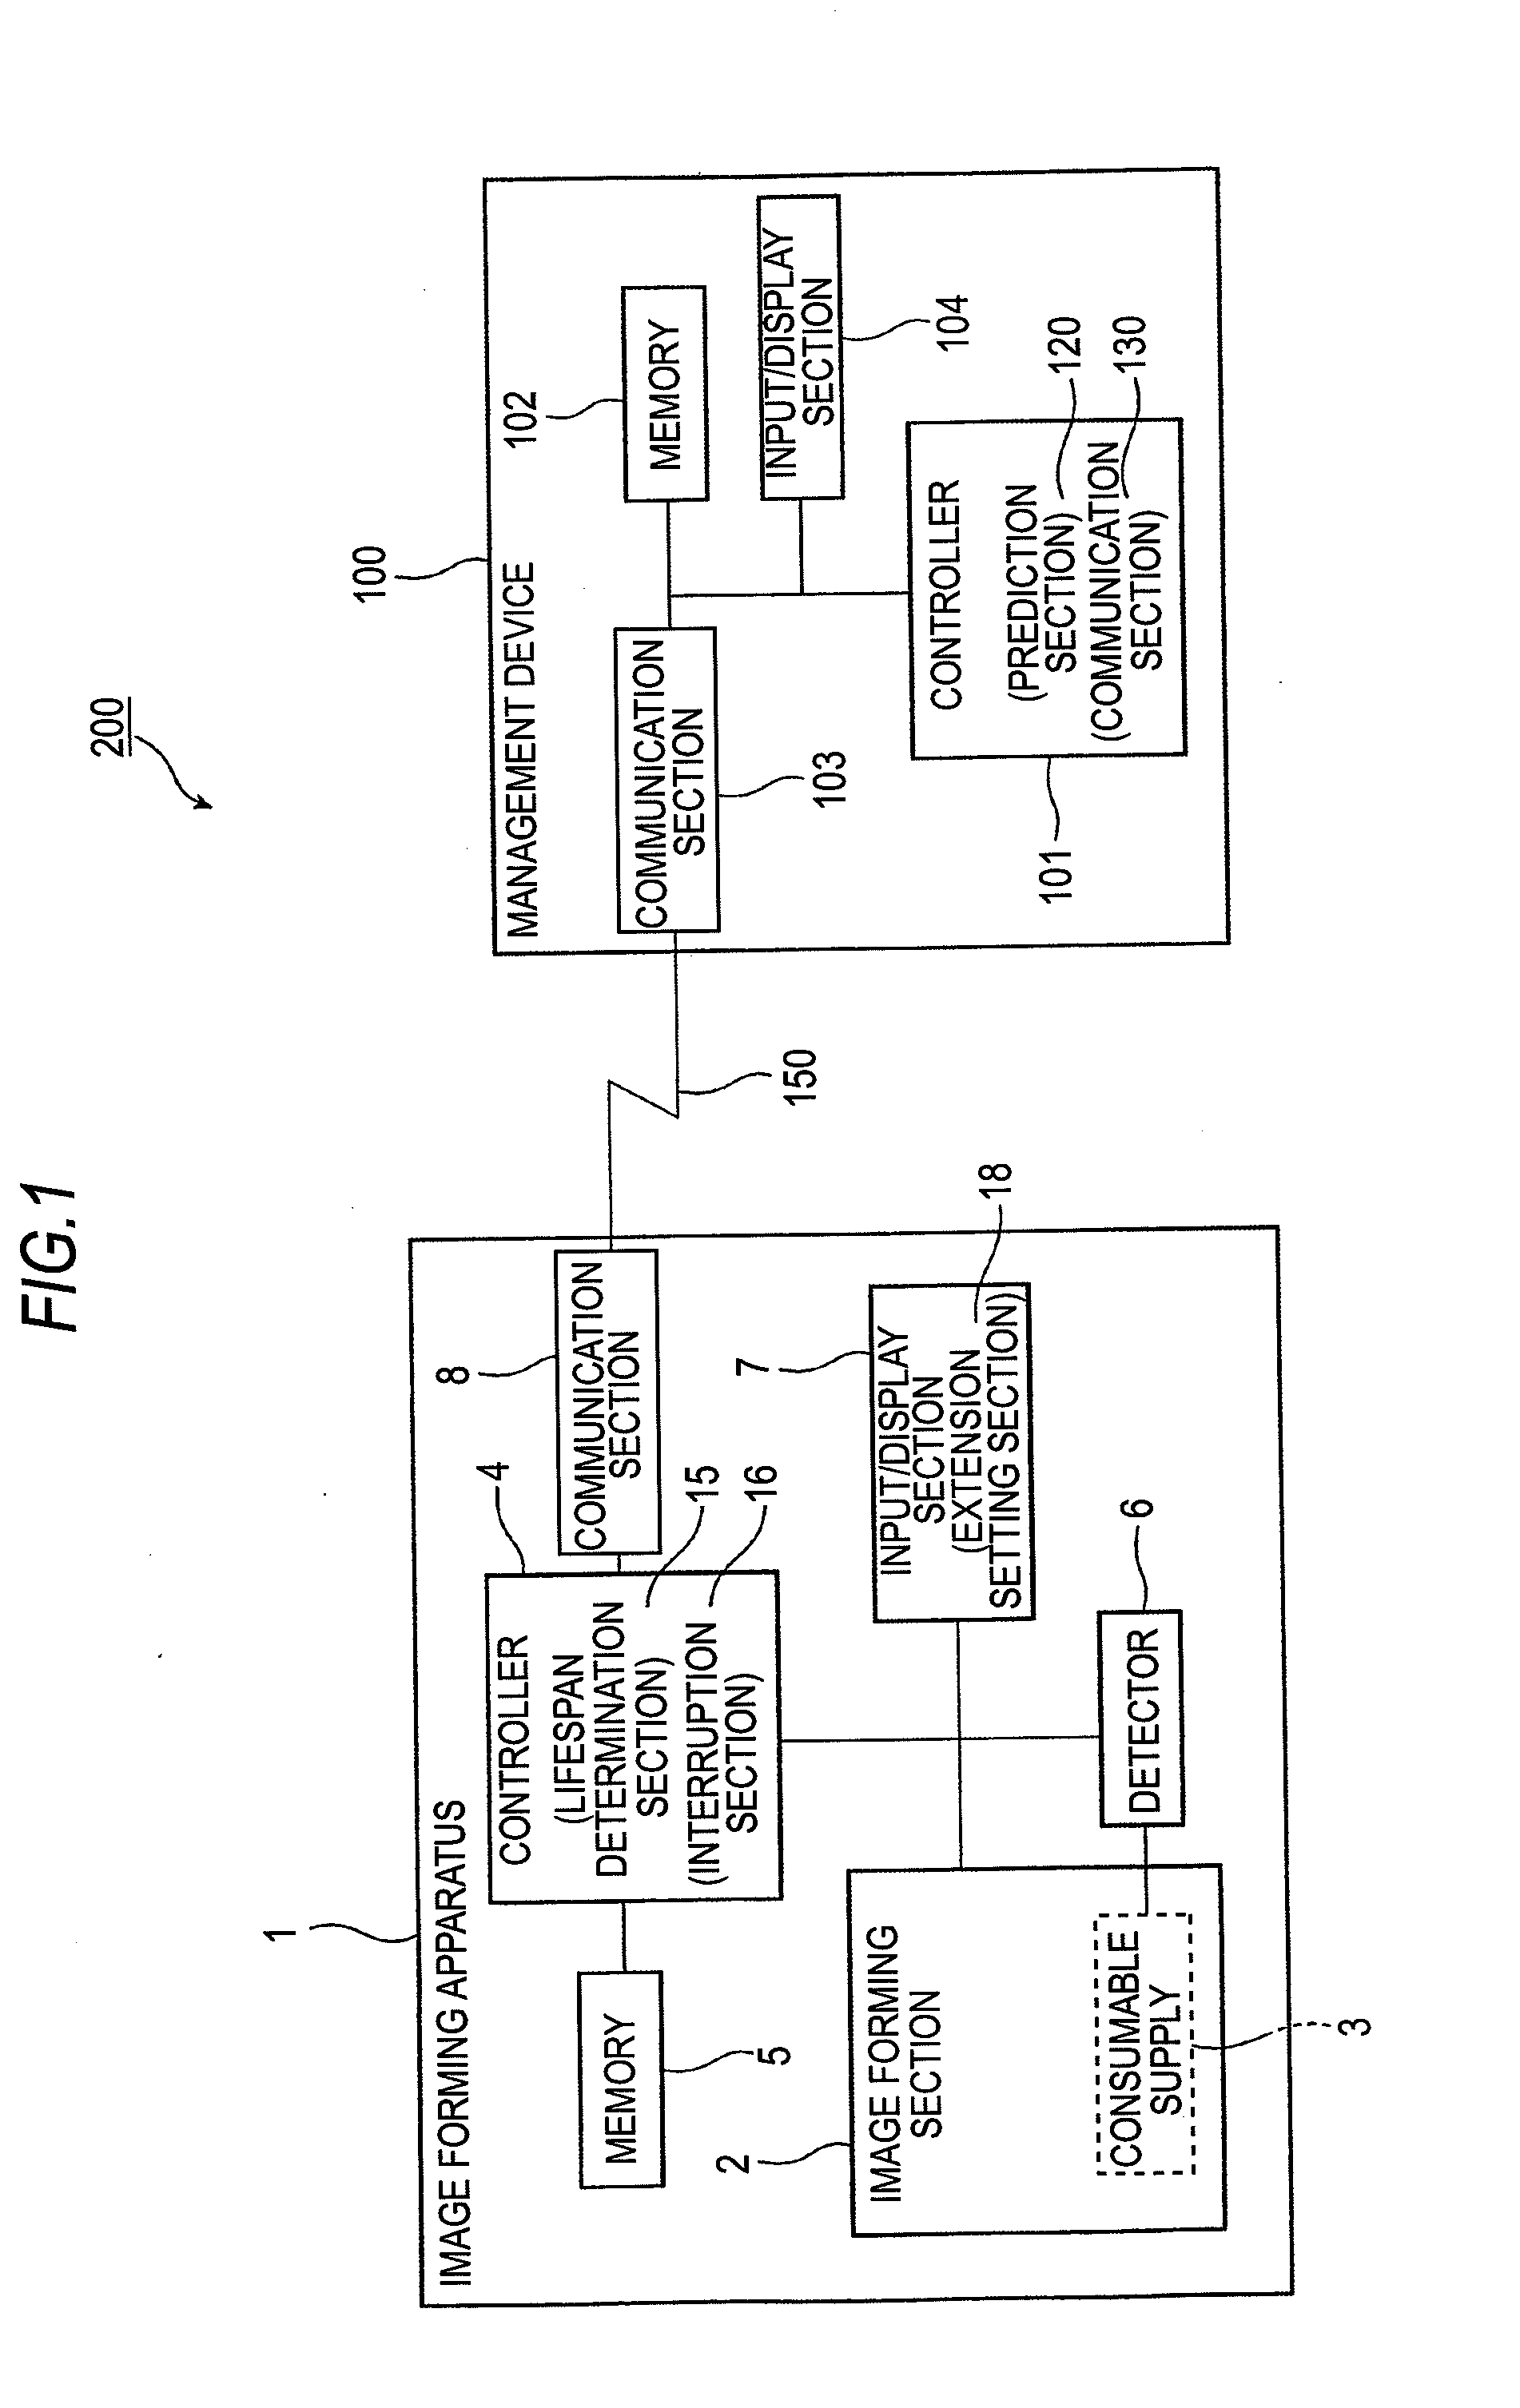 Image forming apparatus and consumable supply management system